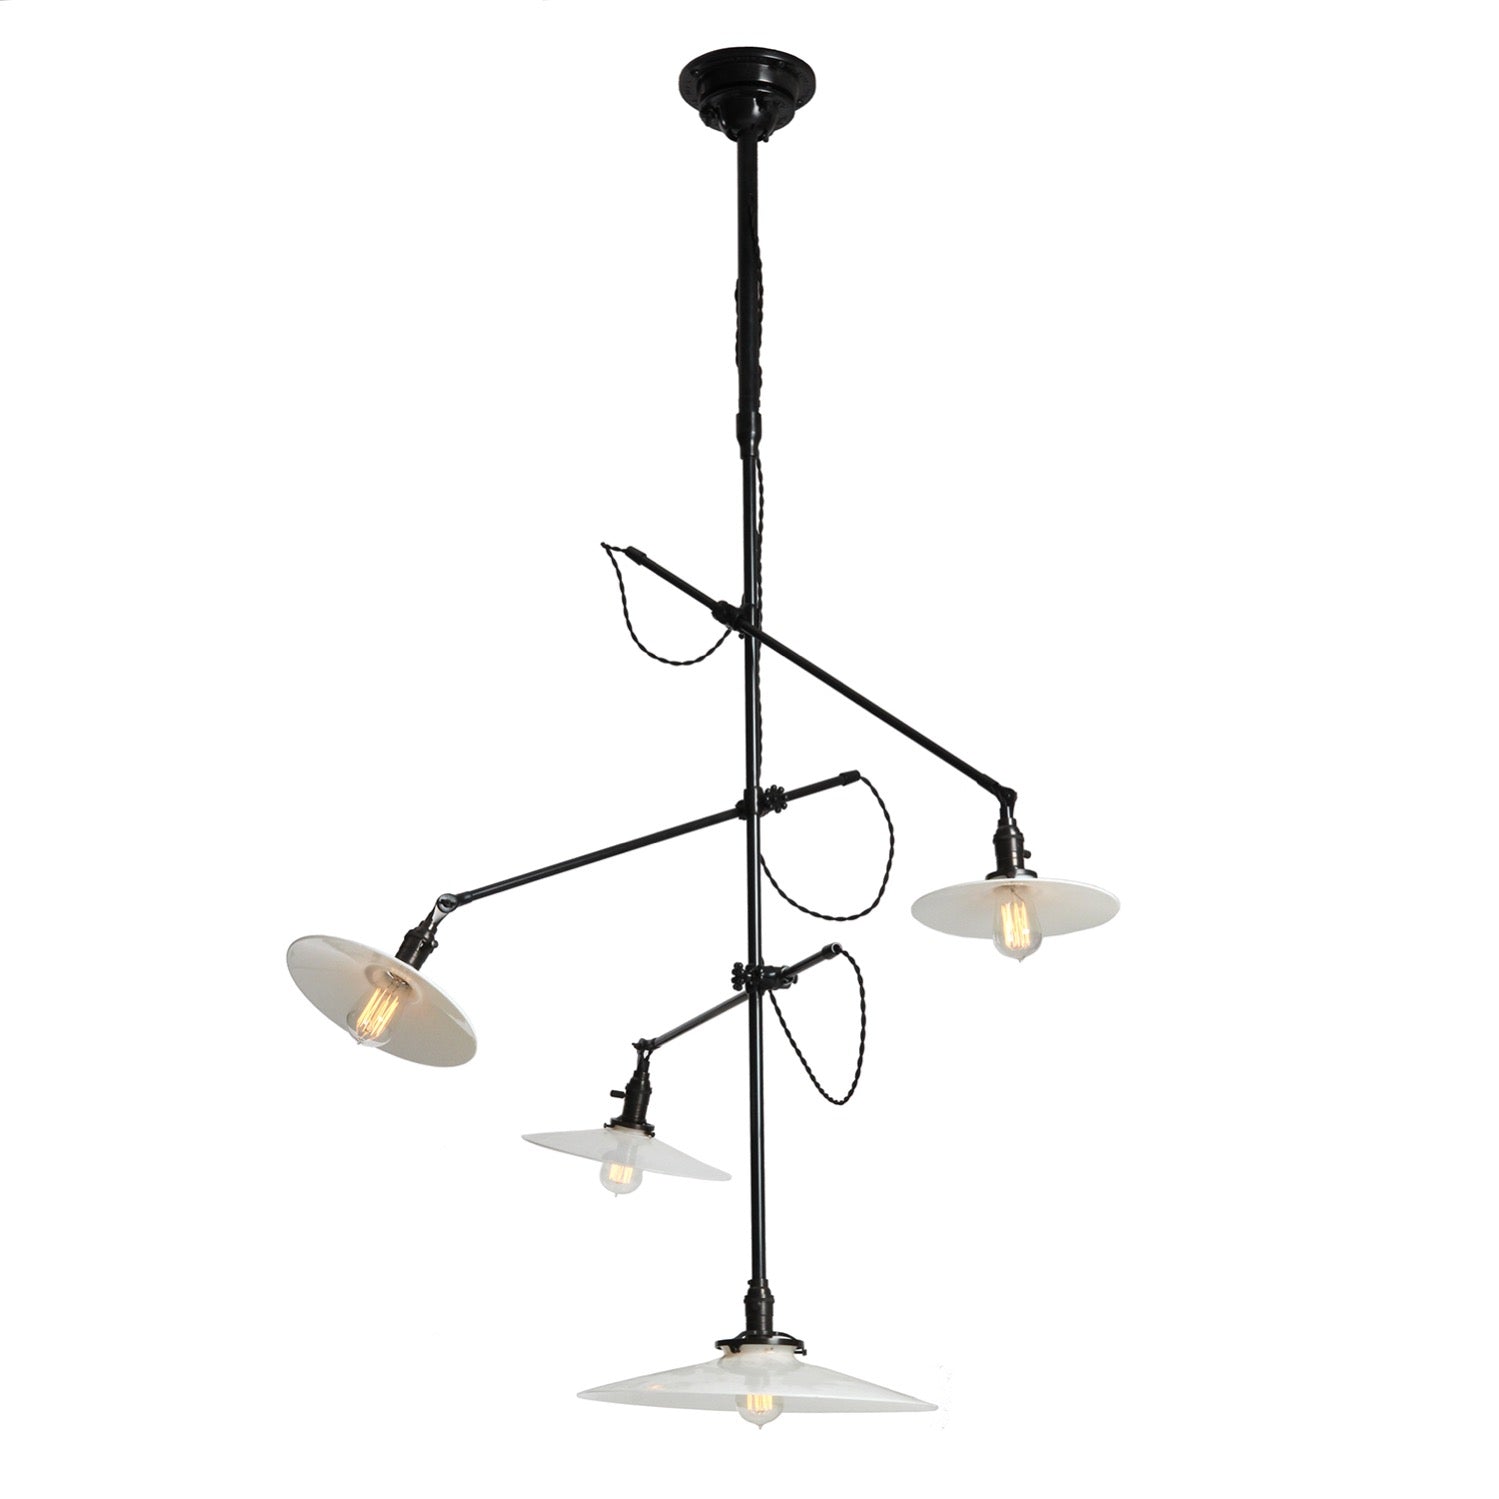 Articulating Ceiling Light by O.C. White for O.C. White Co.